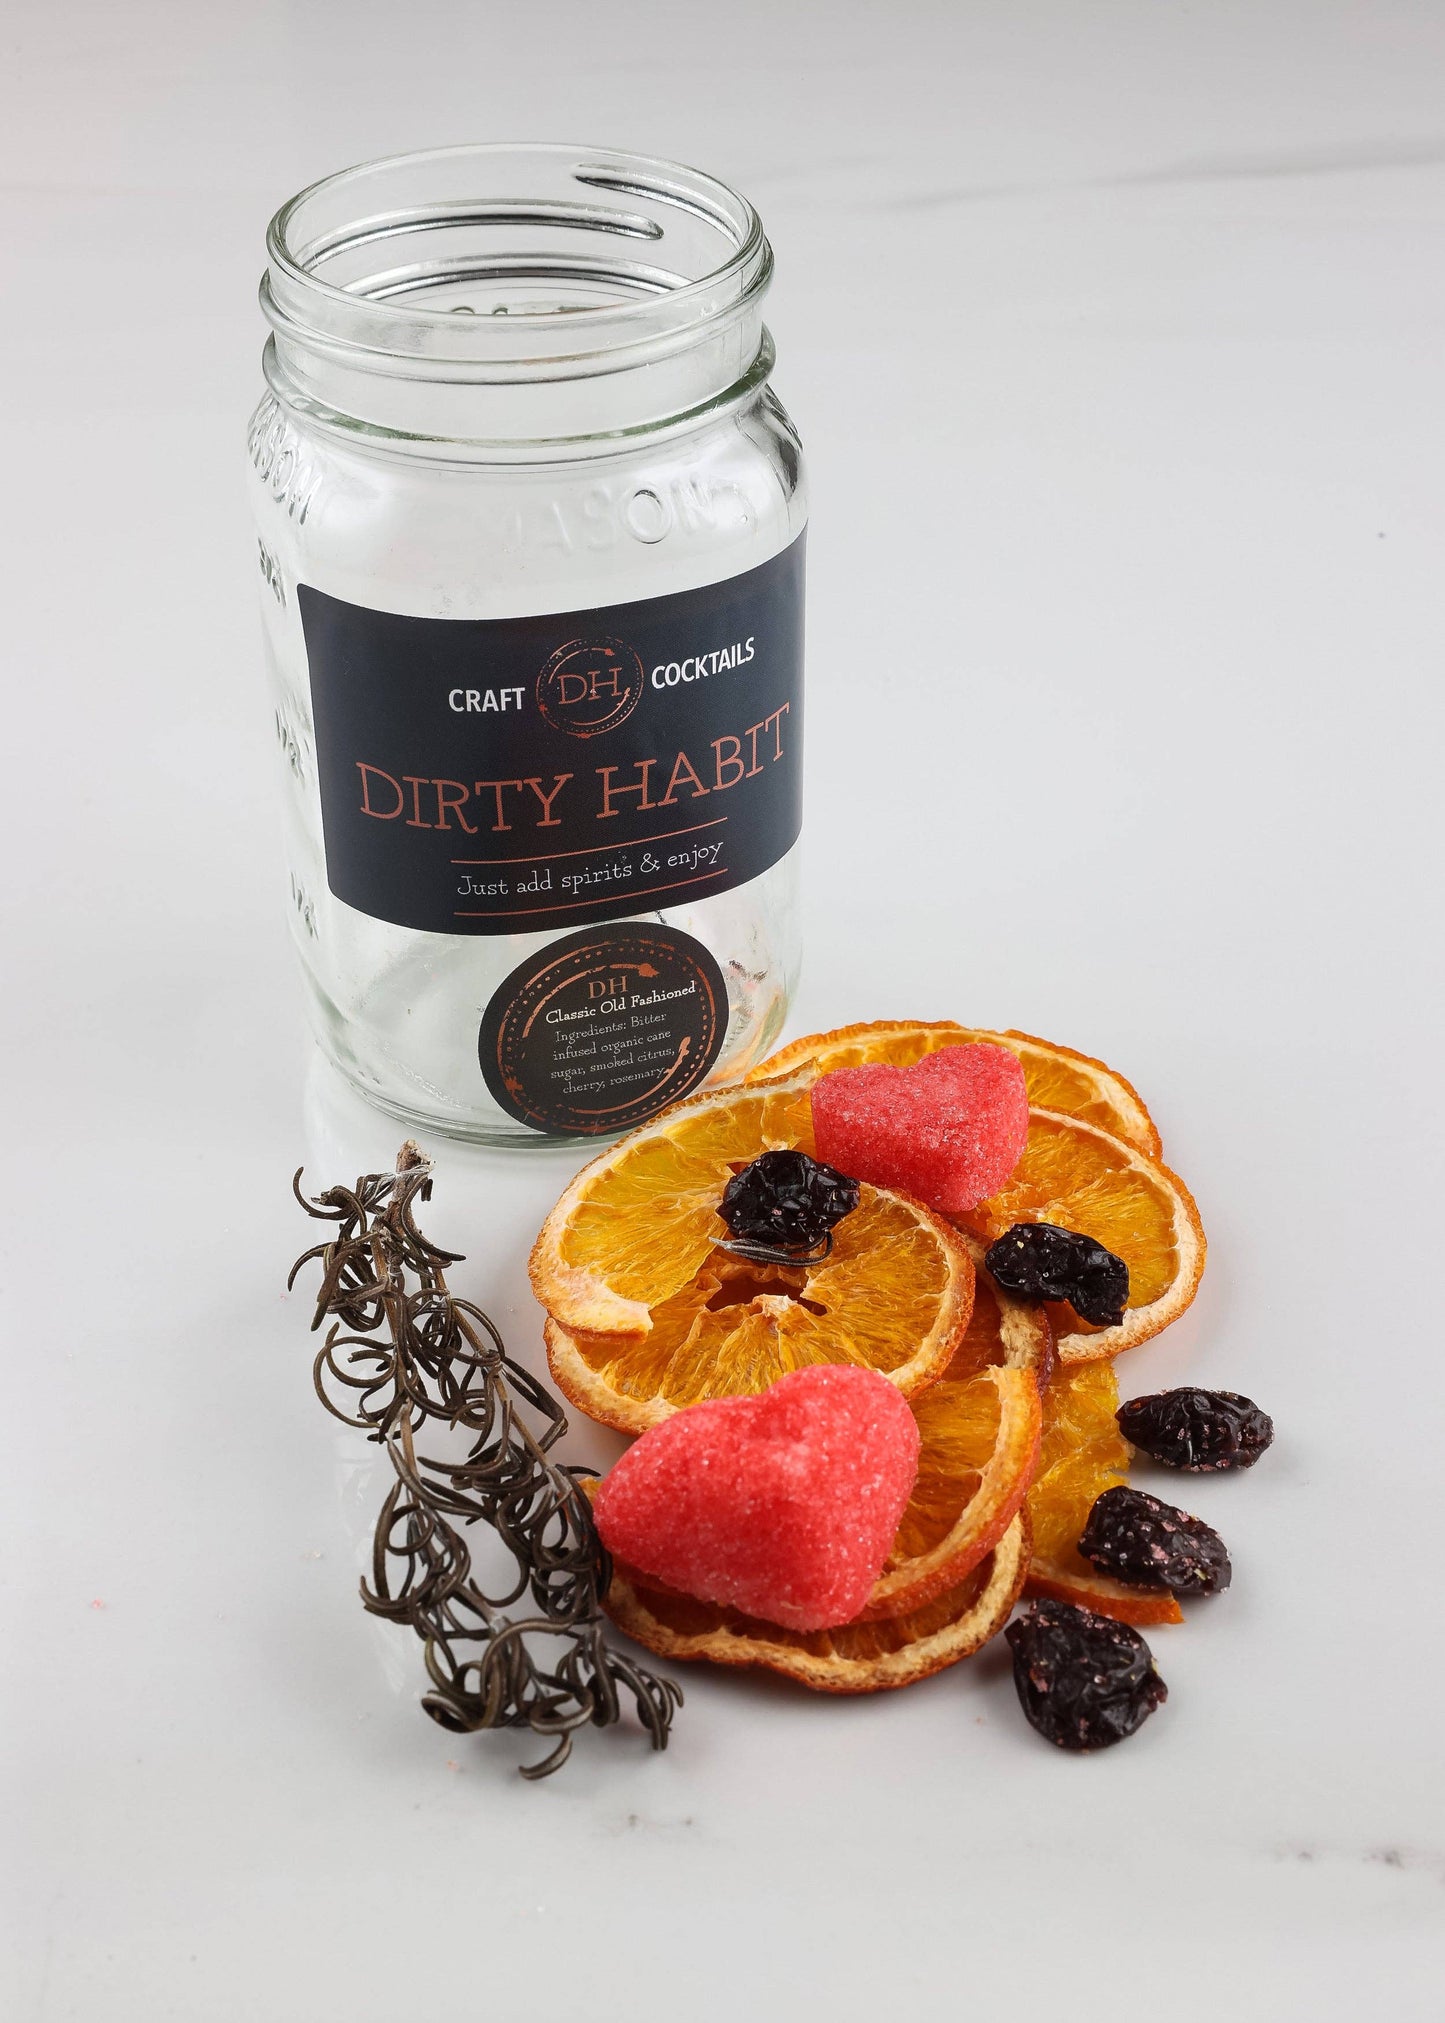 Dirty Habit Cocktails - Classic Dirty Habit Old Fashioned